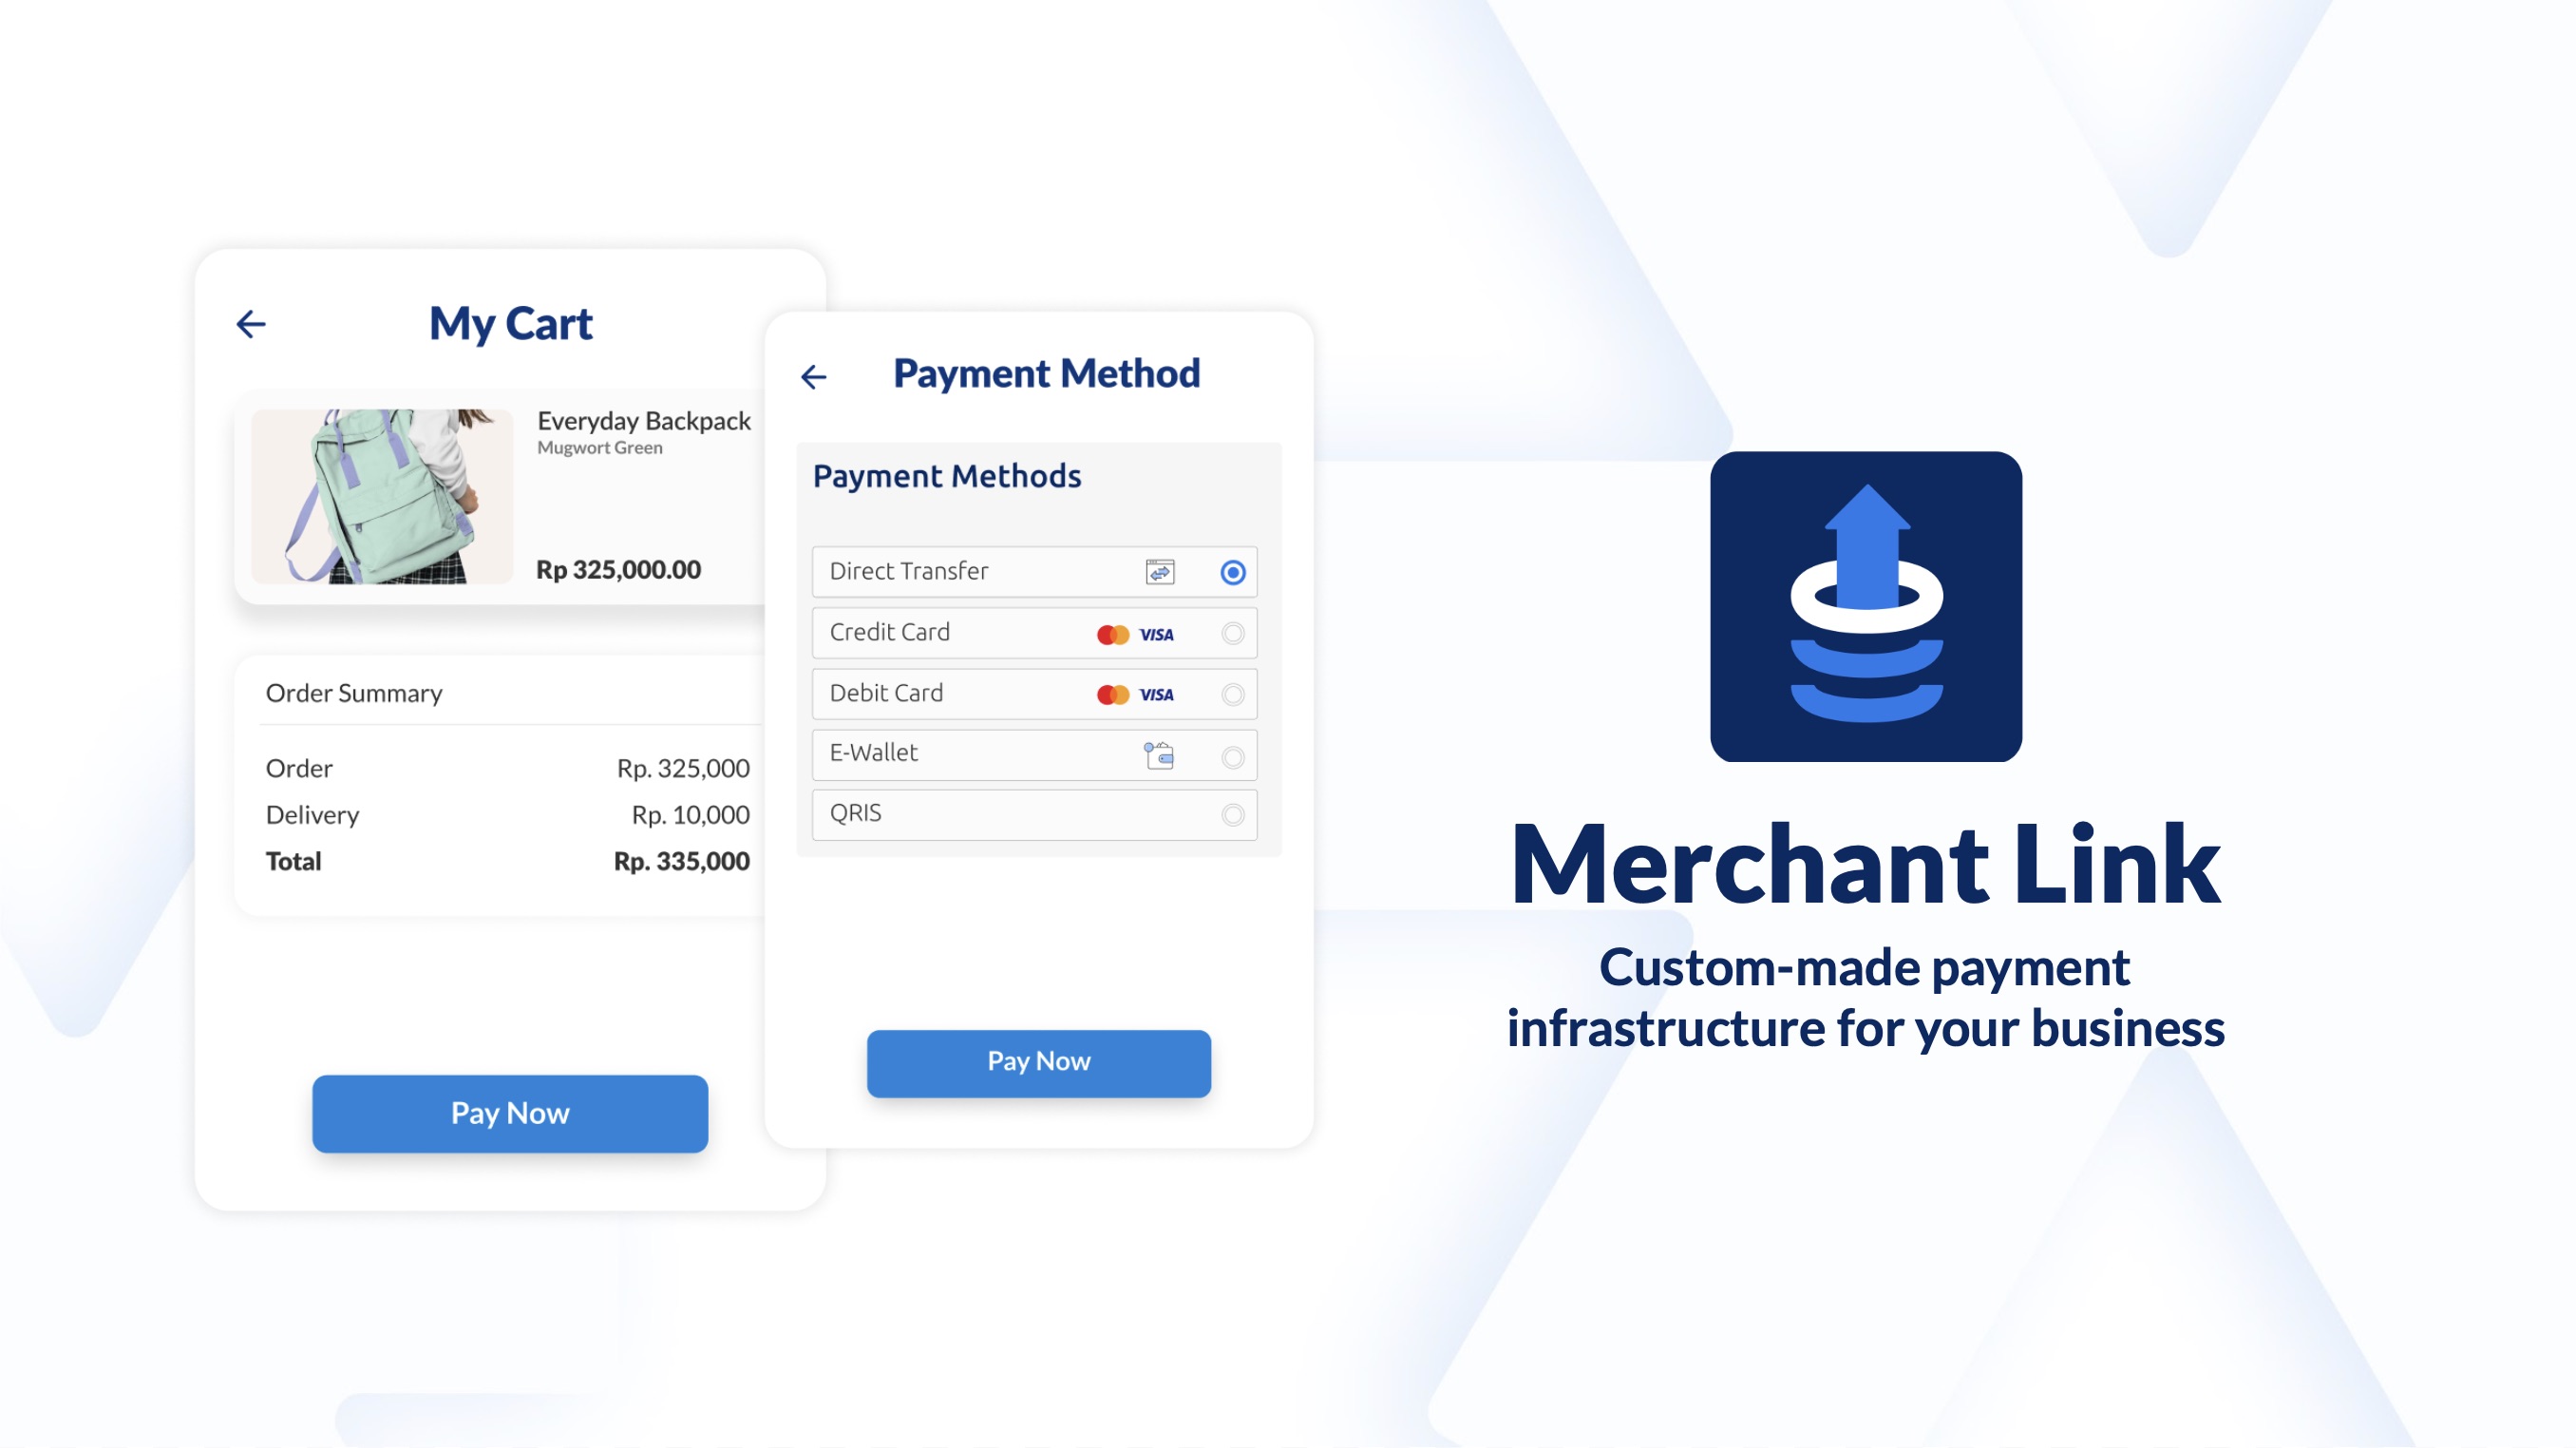 Brankas Merchant Link—Custom-made Payment Infrastructure for your Business